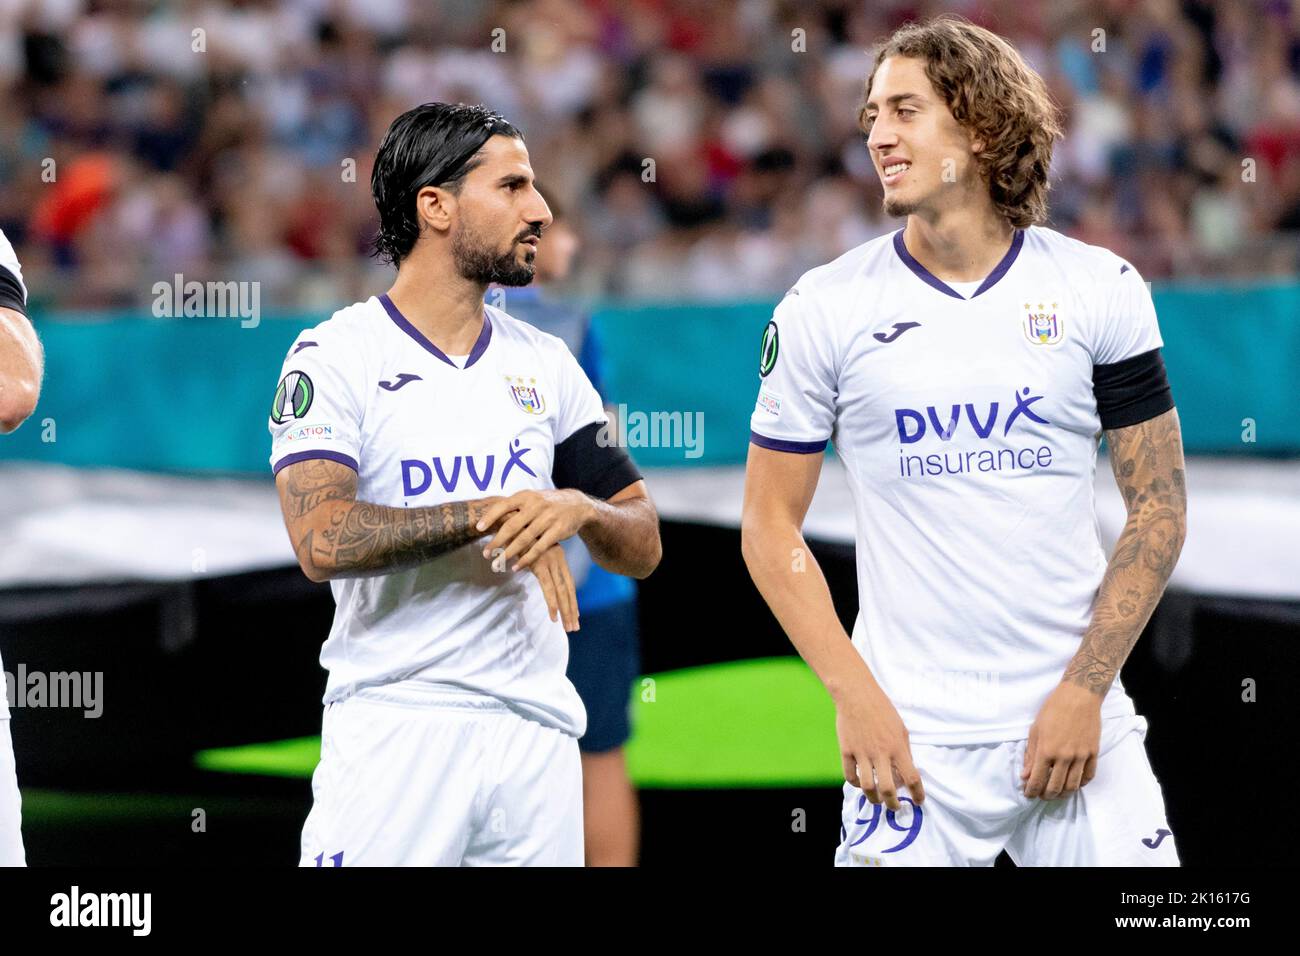 Bucharest, Romania. 16th Sep, 2022. September 16, 2022: Lior Refaelov #11 of RSC Anderlecht and Fabio Silva #99 of RSC Anderlecht during of the UEFA Europa Conference League group B match between FCSB Bucharest and RSC Anderlecht at National Arena Stadium in Bucharest, Romania ROU. Catalin Soare/Cronos Credit: Cronos/Alamy Live News Stock Photo